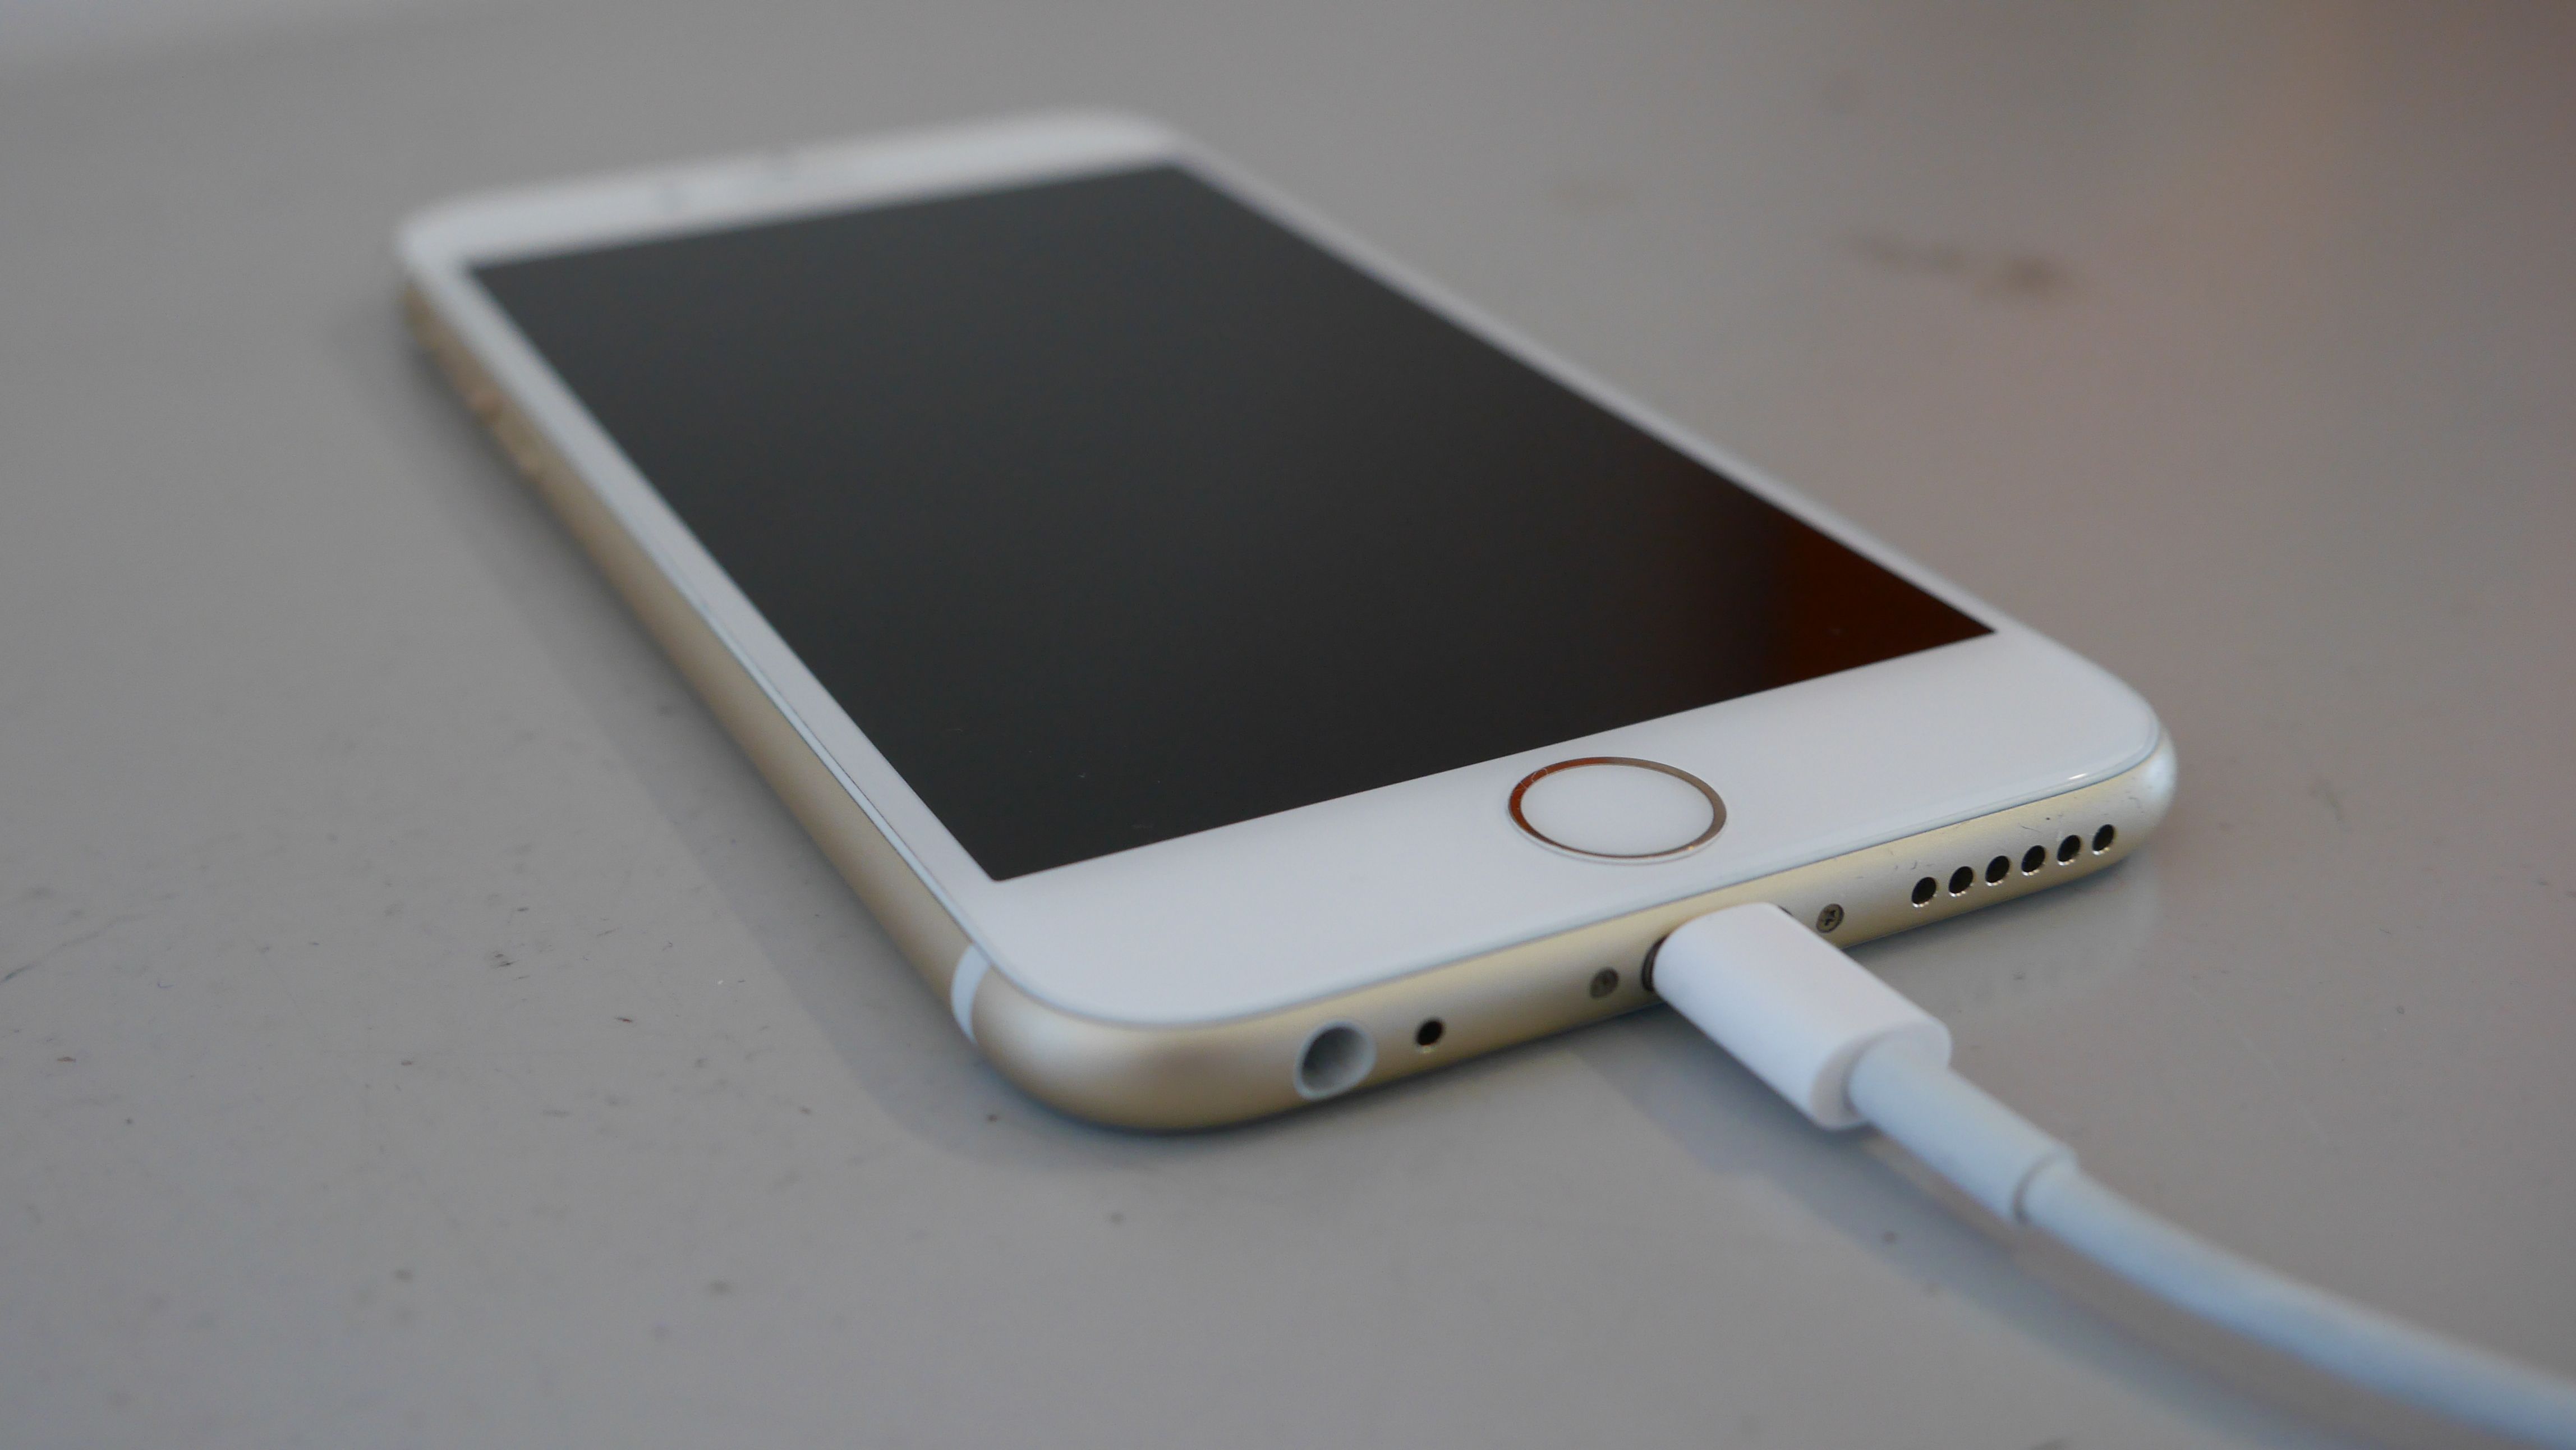 You genuinely won't believe how much it costs to charge your iPhone for a  year